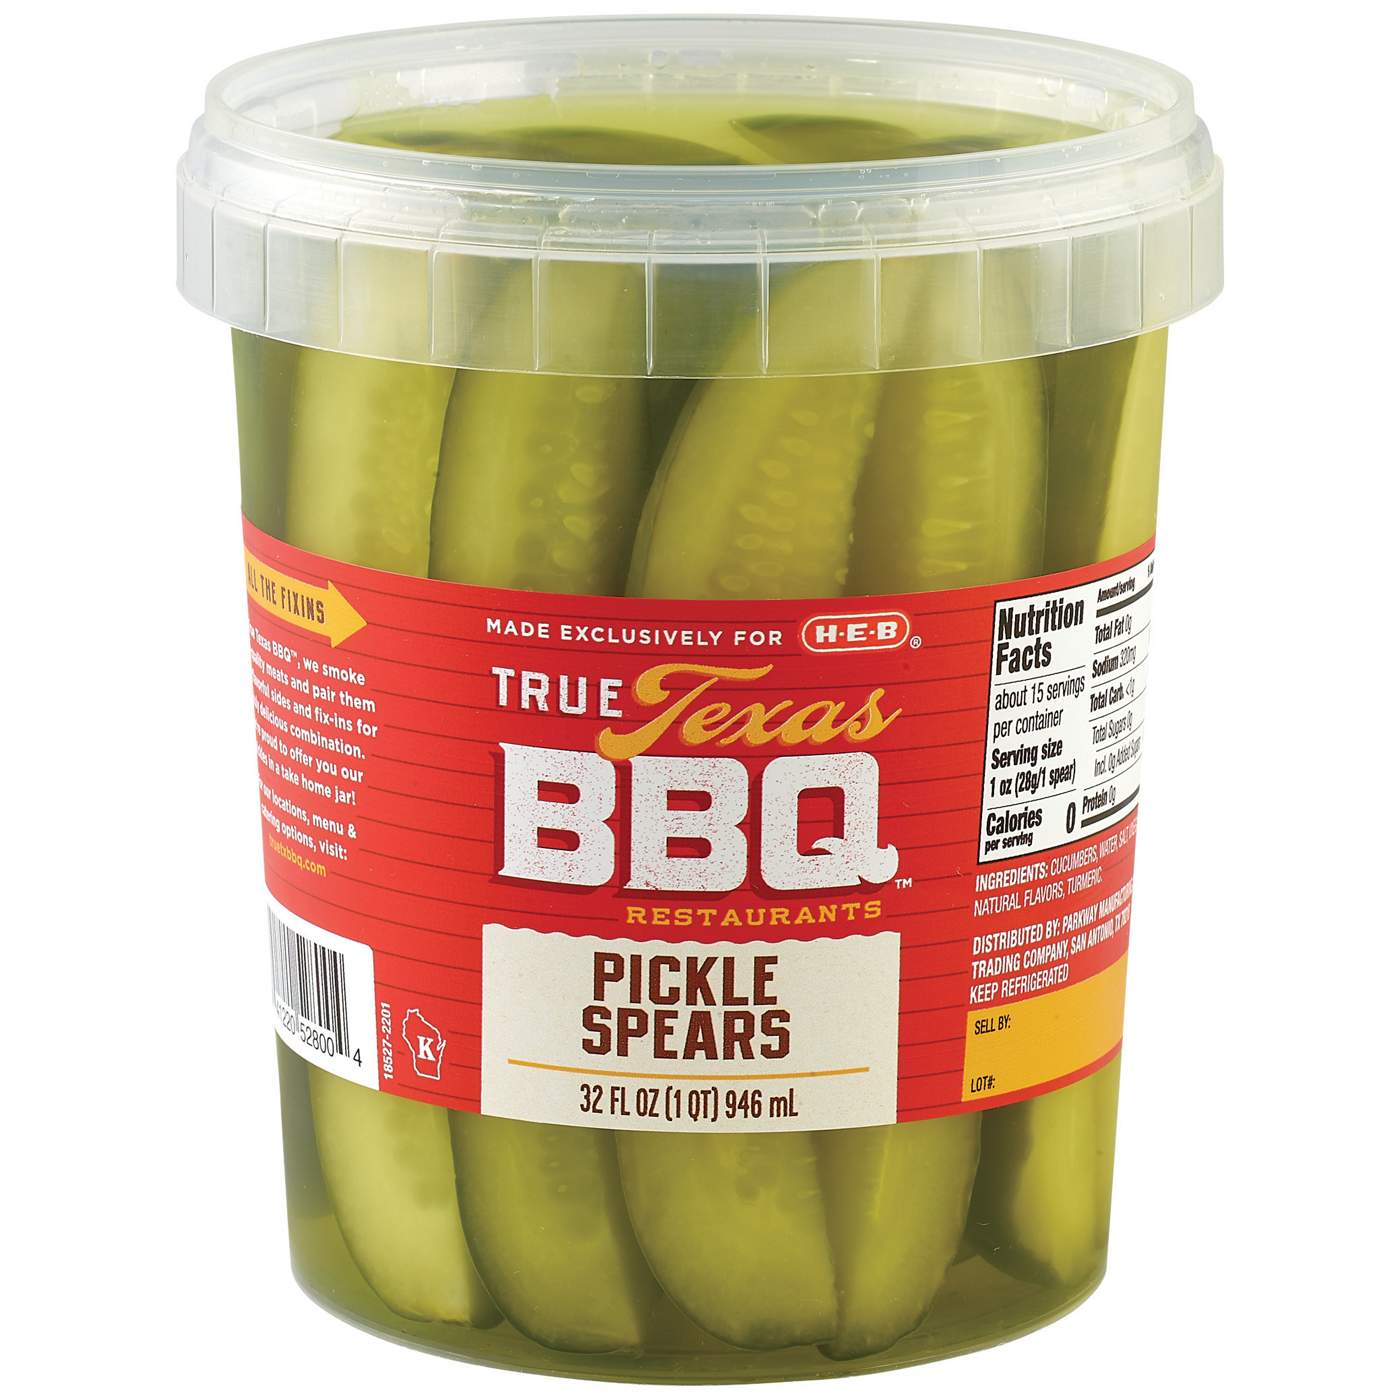 True Texas BBQ Pickle Spears; image 1 of 2